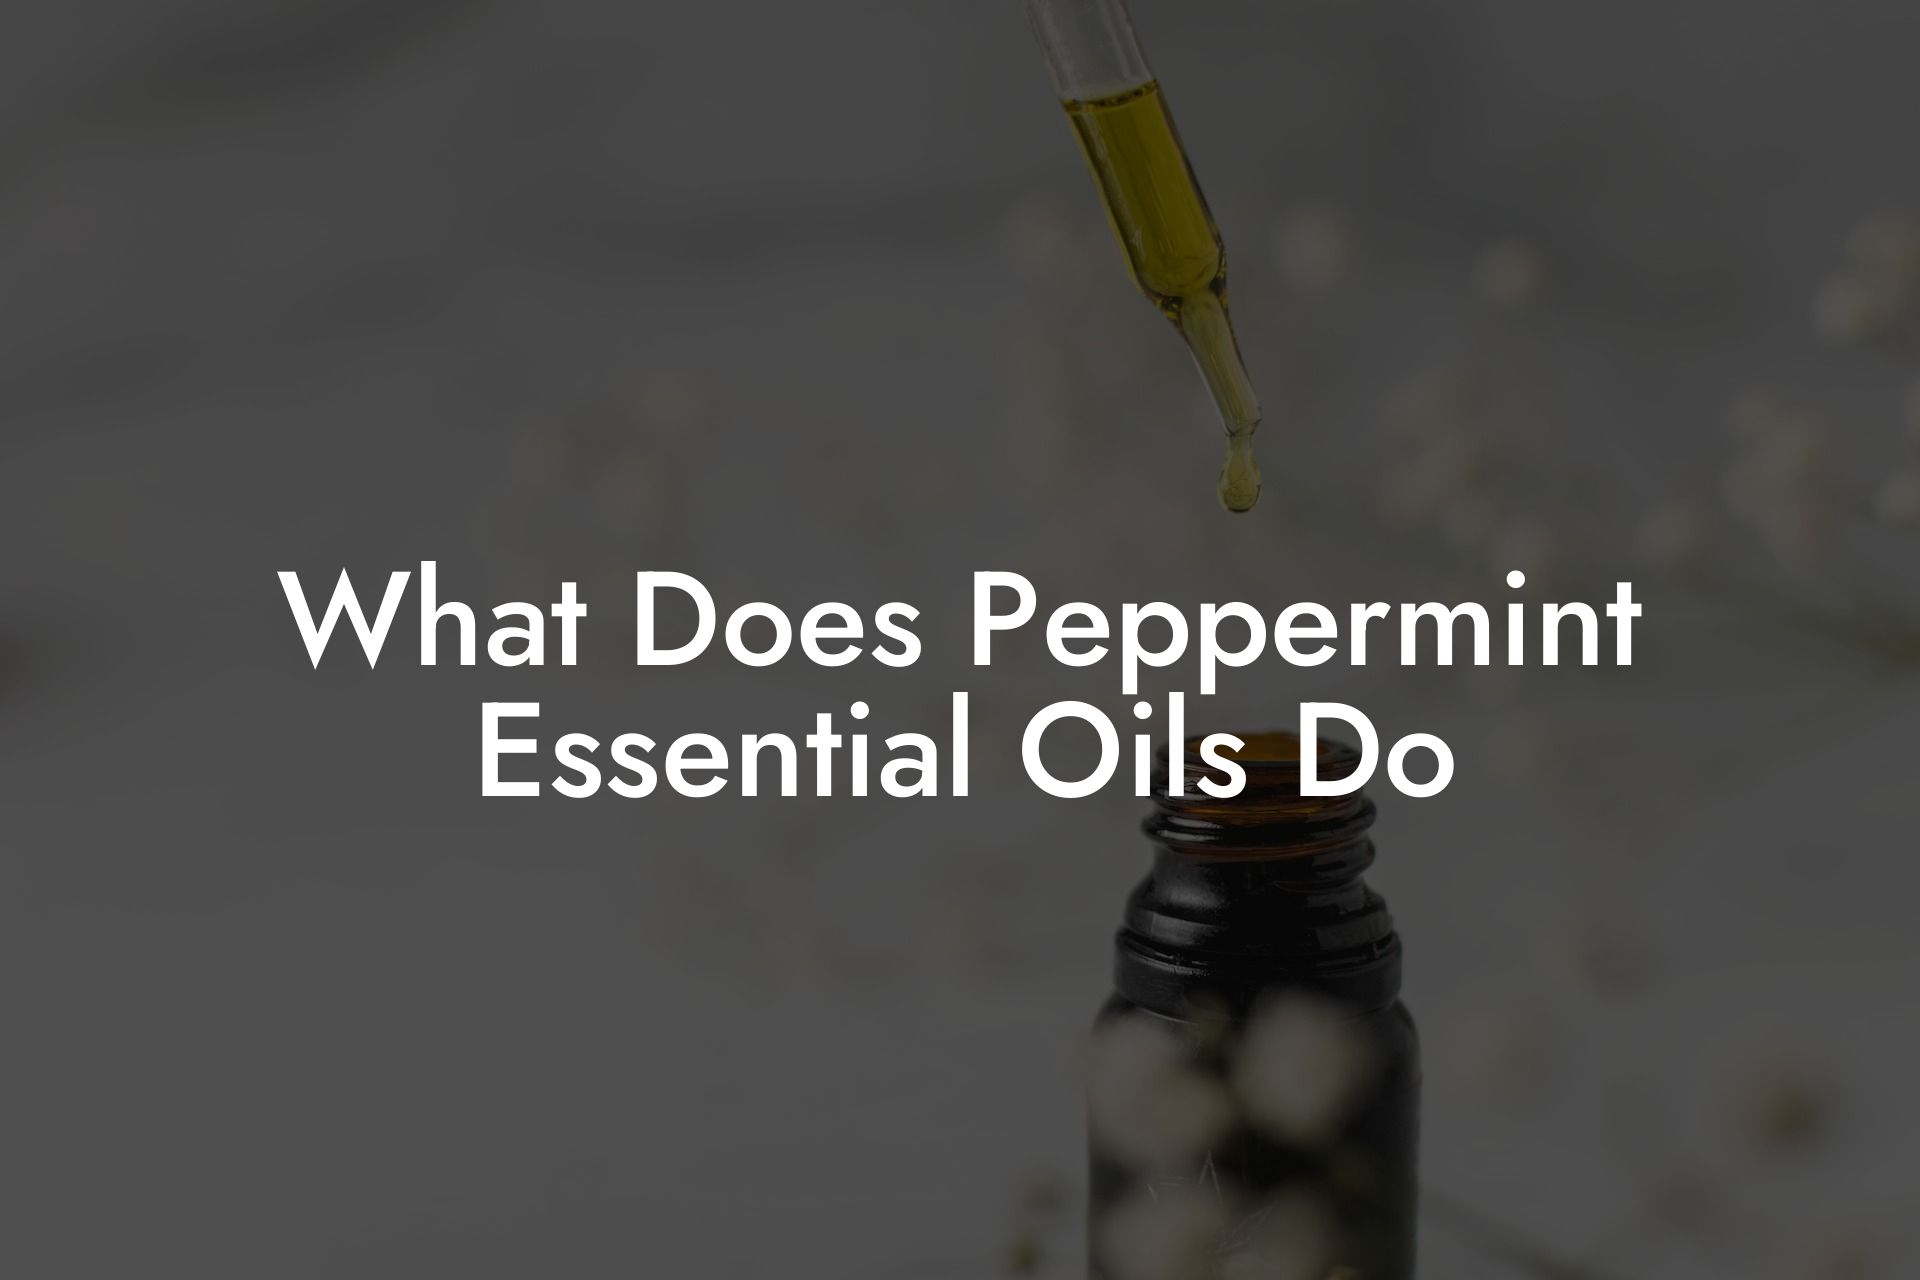 What Does Peppermint Essential Oils Do